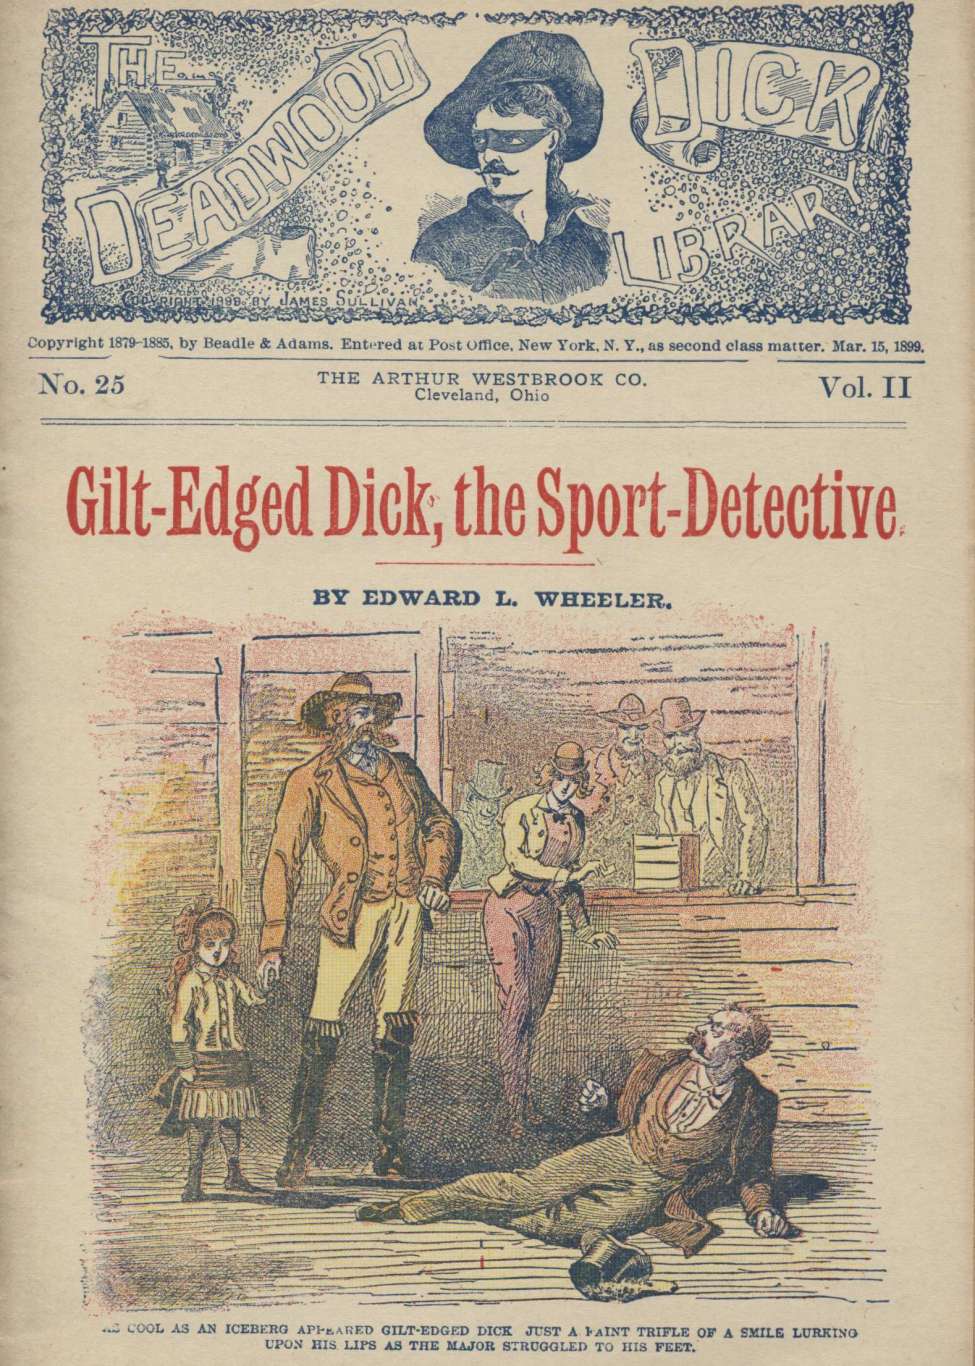 Book Cover For Deadwood Dick Library v2 25 - Gilt-Edged Dick, the Sport Detective